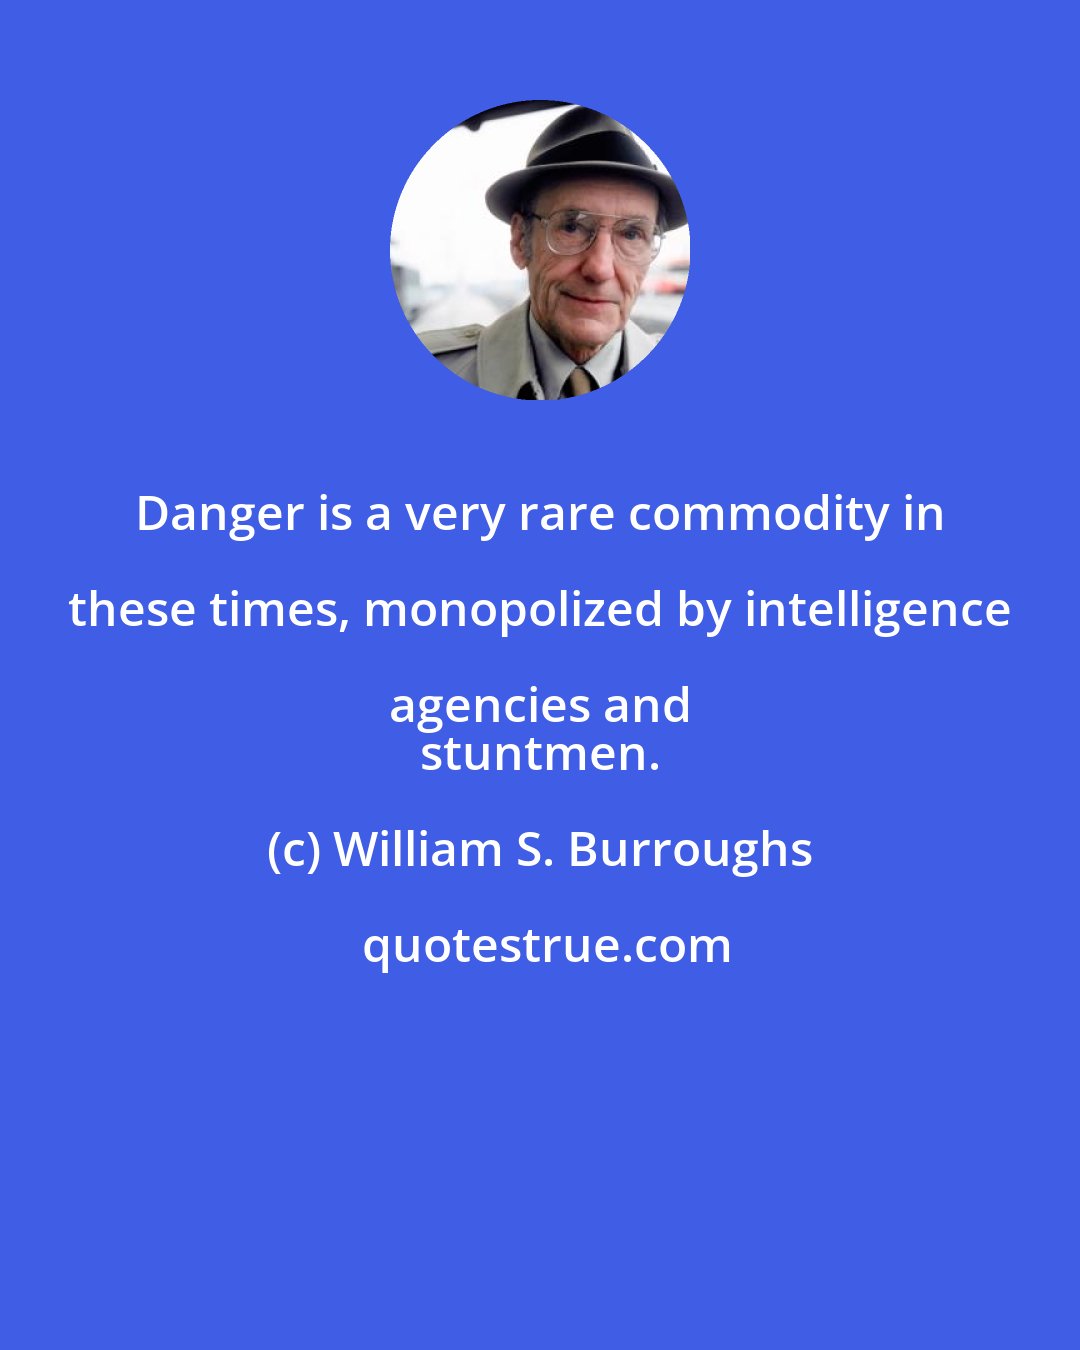 William S. Burroughs: Danger is a very rare commodity in these times, monopolized by intelligence agencies and 
 stuntmen.